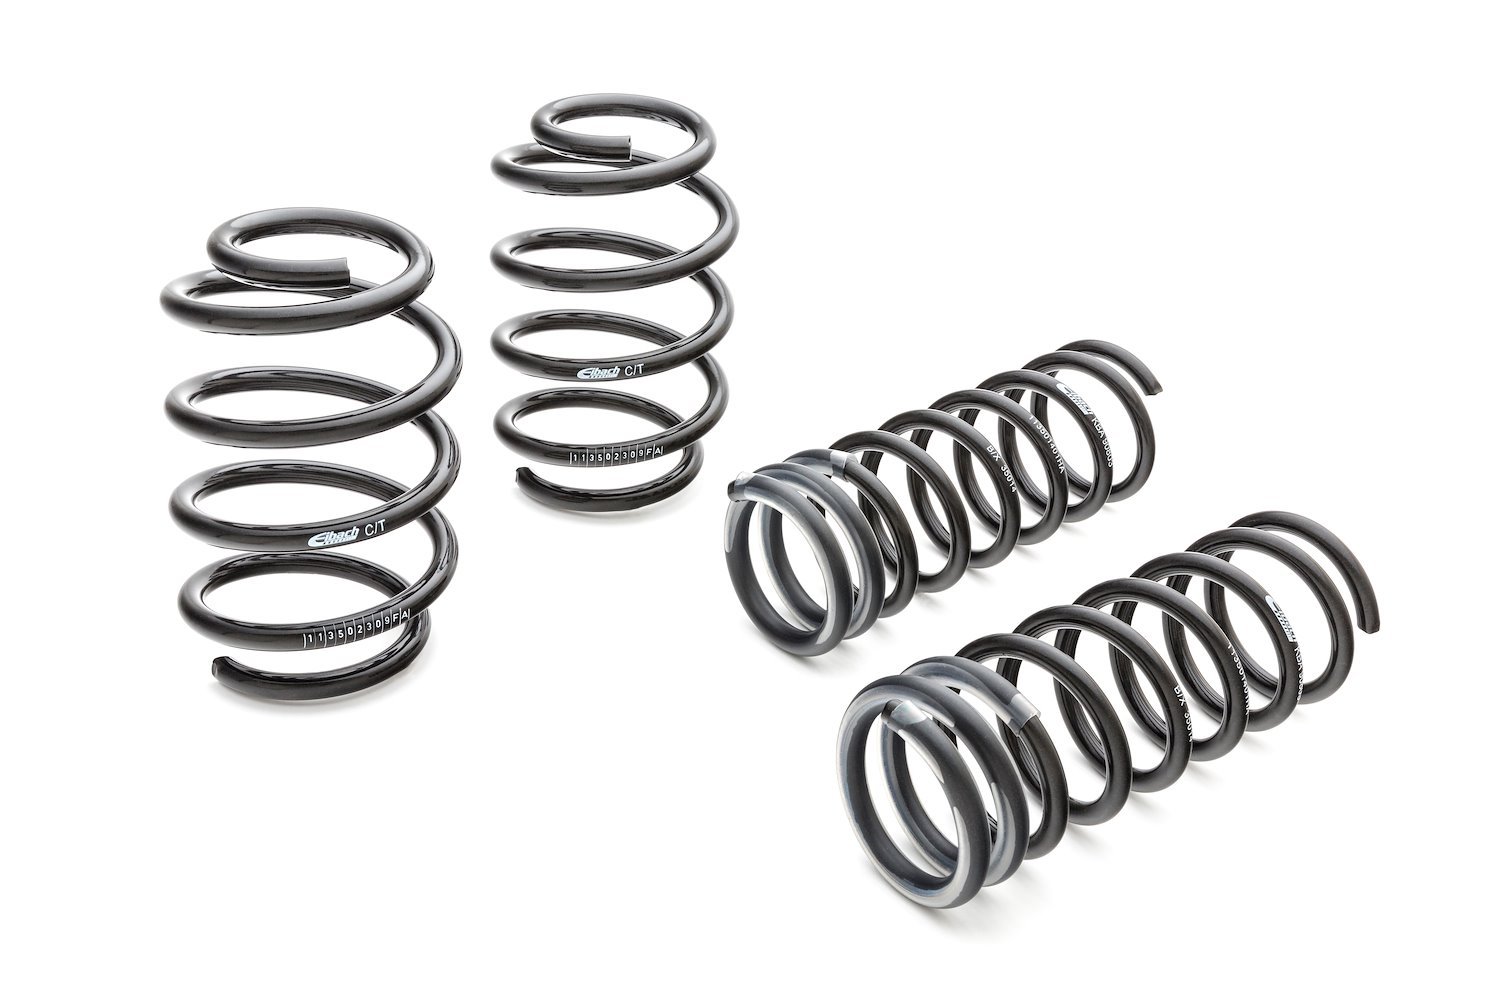 38149.140 Pro-Kit Lowering Springs 2011-2015 Chevy Cruze 1.8L - .800 in. Front/1.200 in. Rear Drop